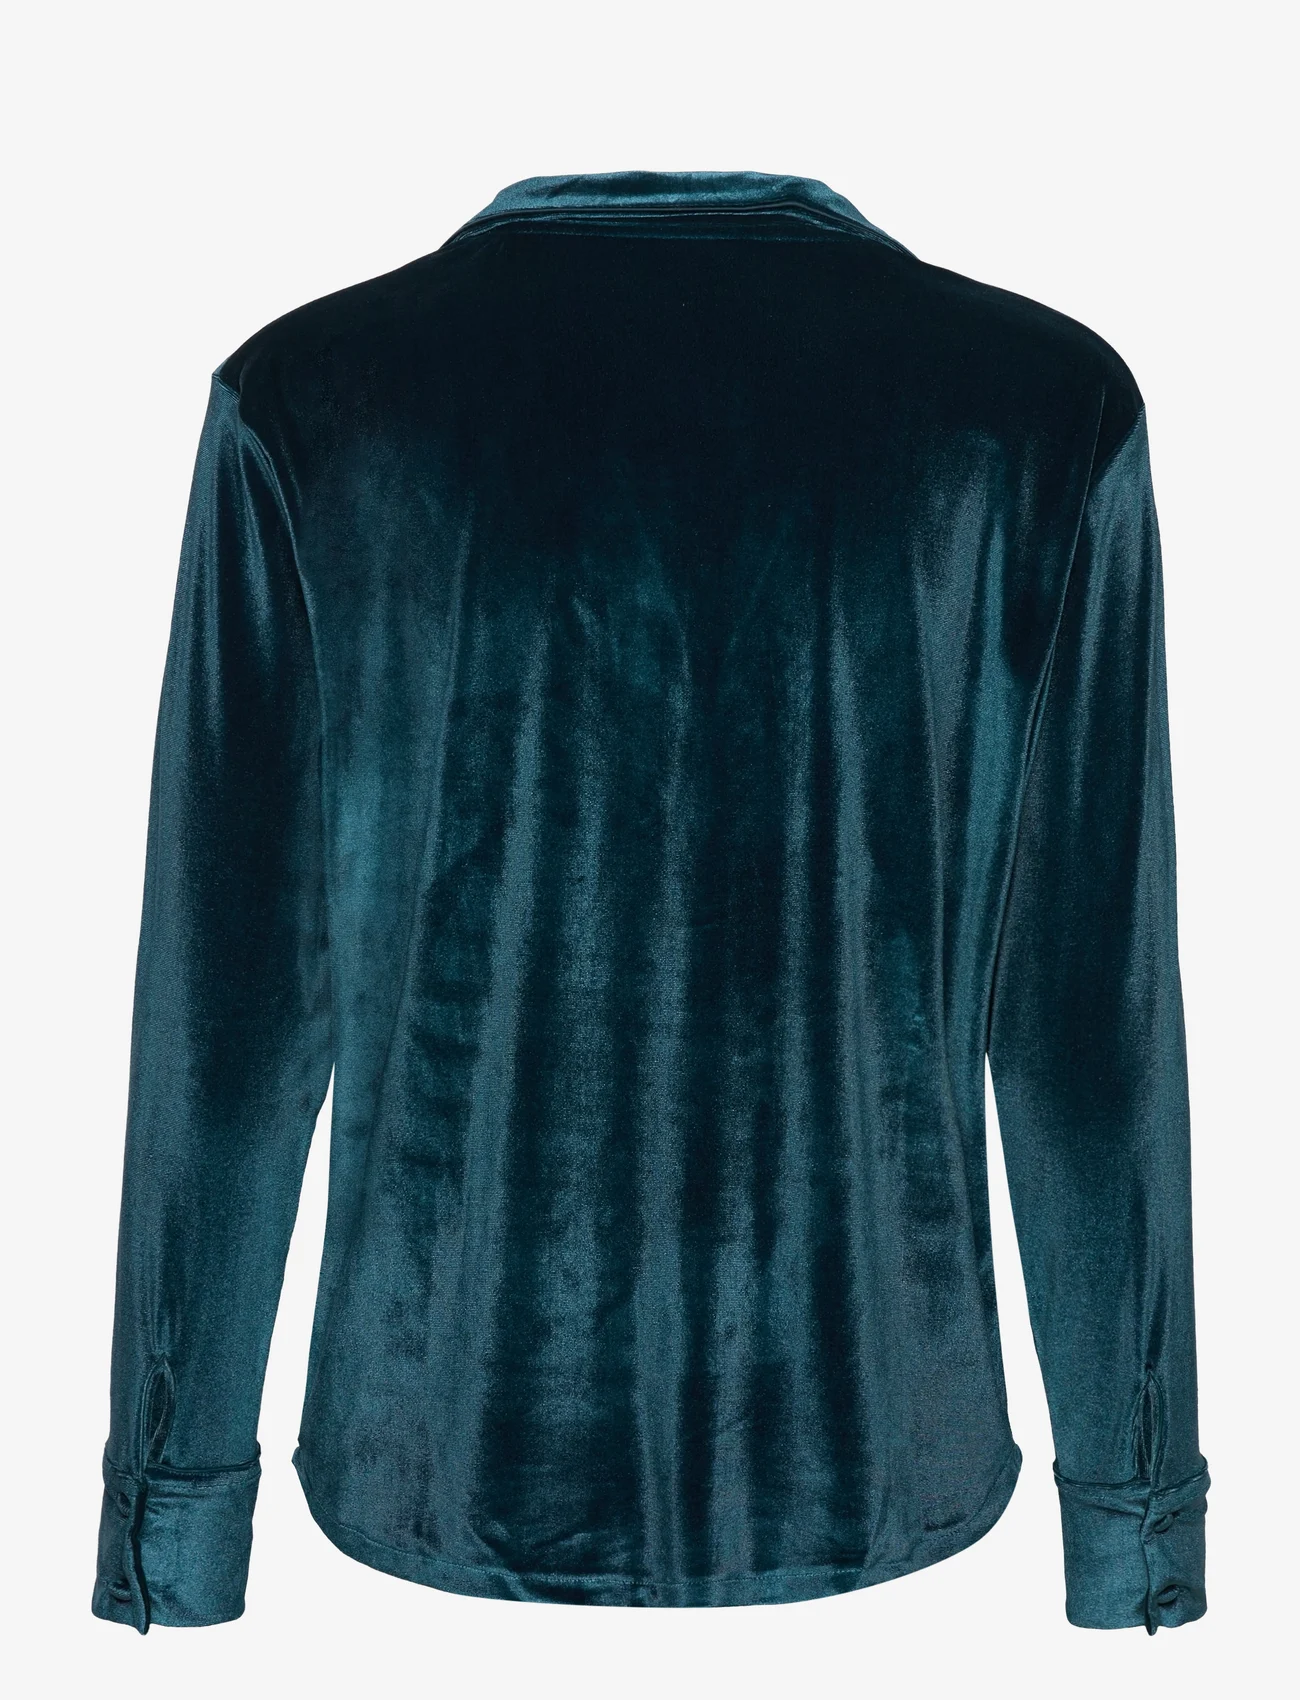 Hunkemöller - Jacket LS Shiny Velours Piping - lowest prices - reflecting pond - 1